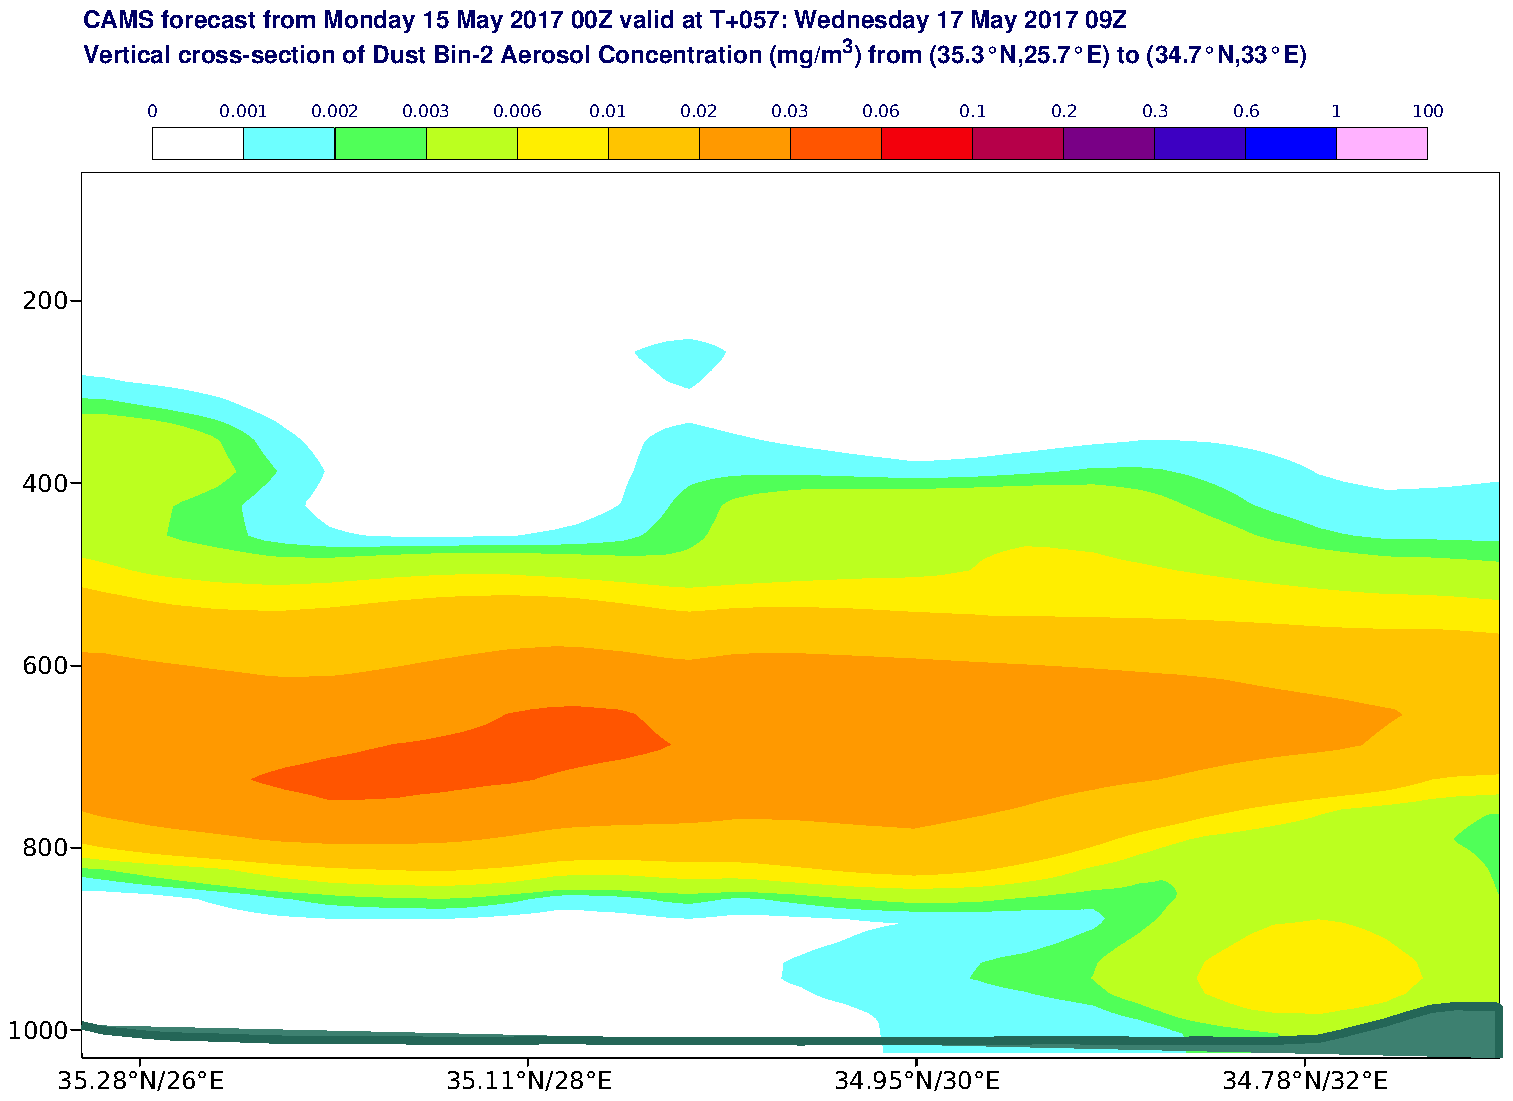 Vertical cross-section of Dust Bin-2 Aerosol Concentration (mg/m3) valid at T57 - 2017-05-17 09:00